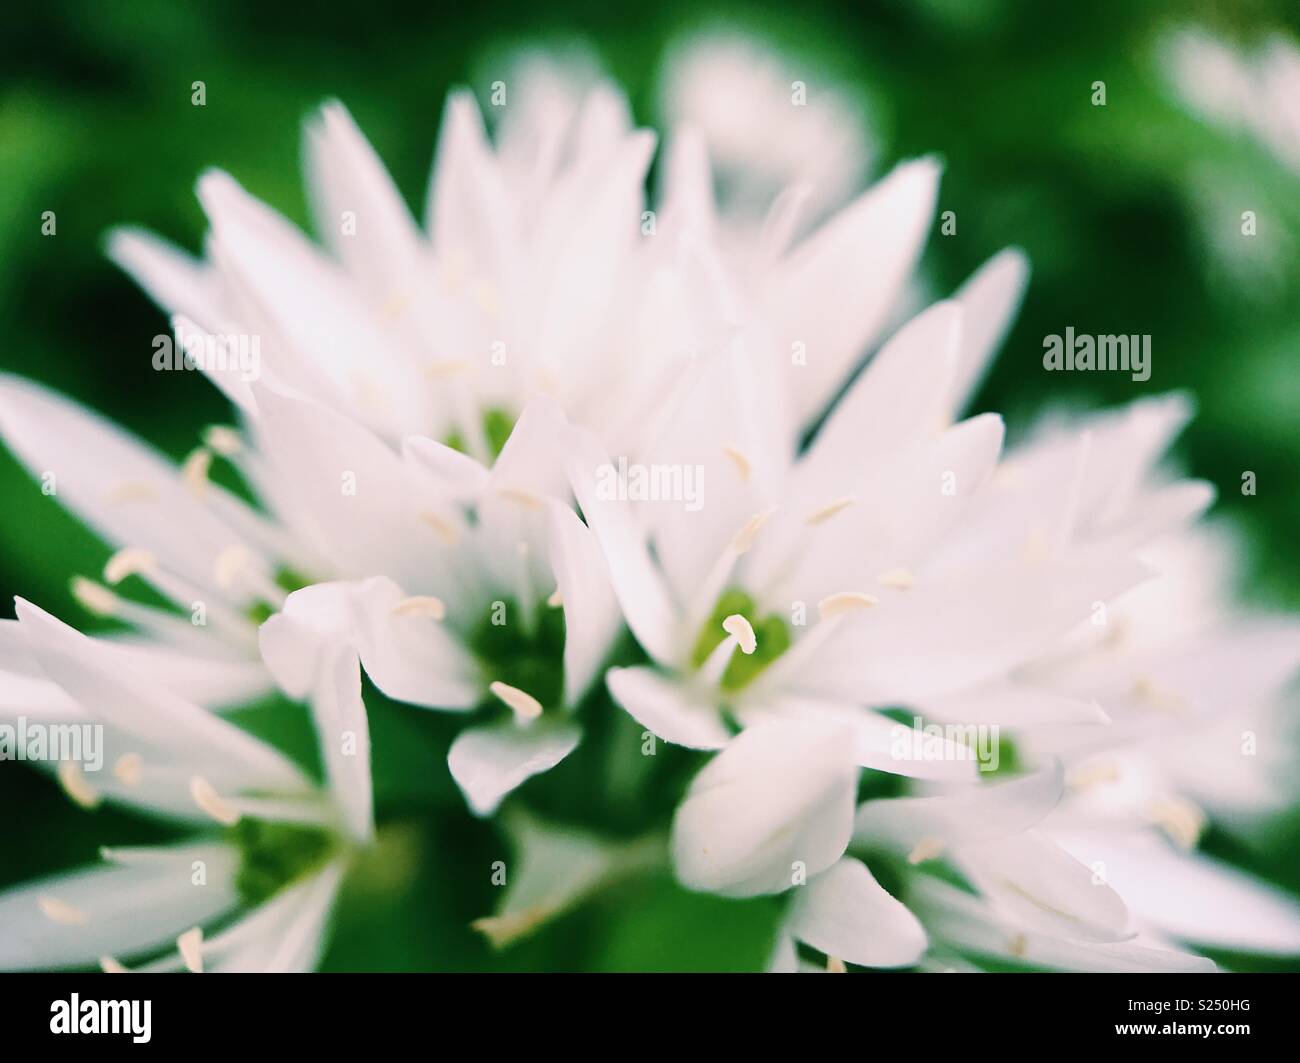 Macro photograph of white wild garlic flowers, also known as ramps, in an English garden. Stock Photo